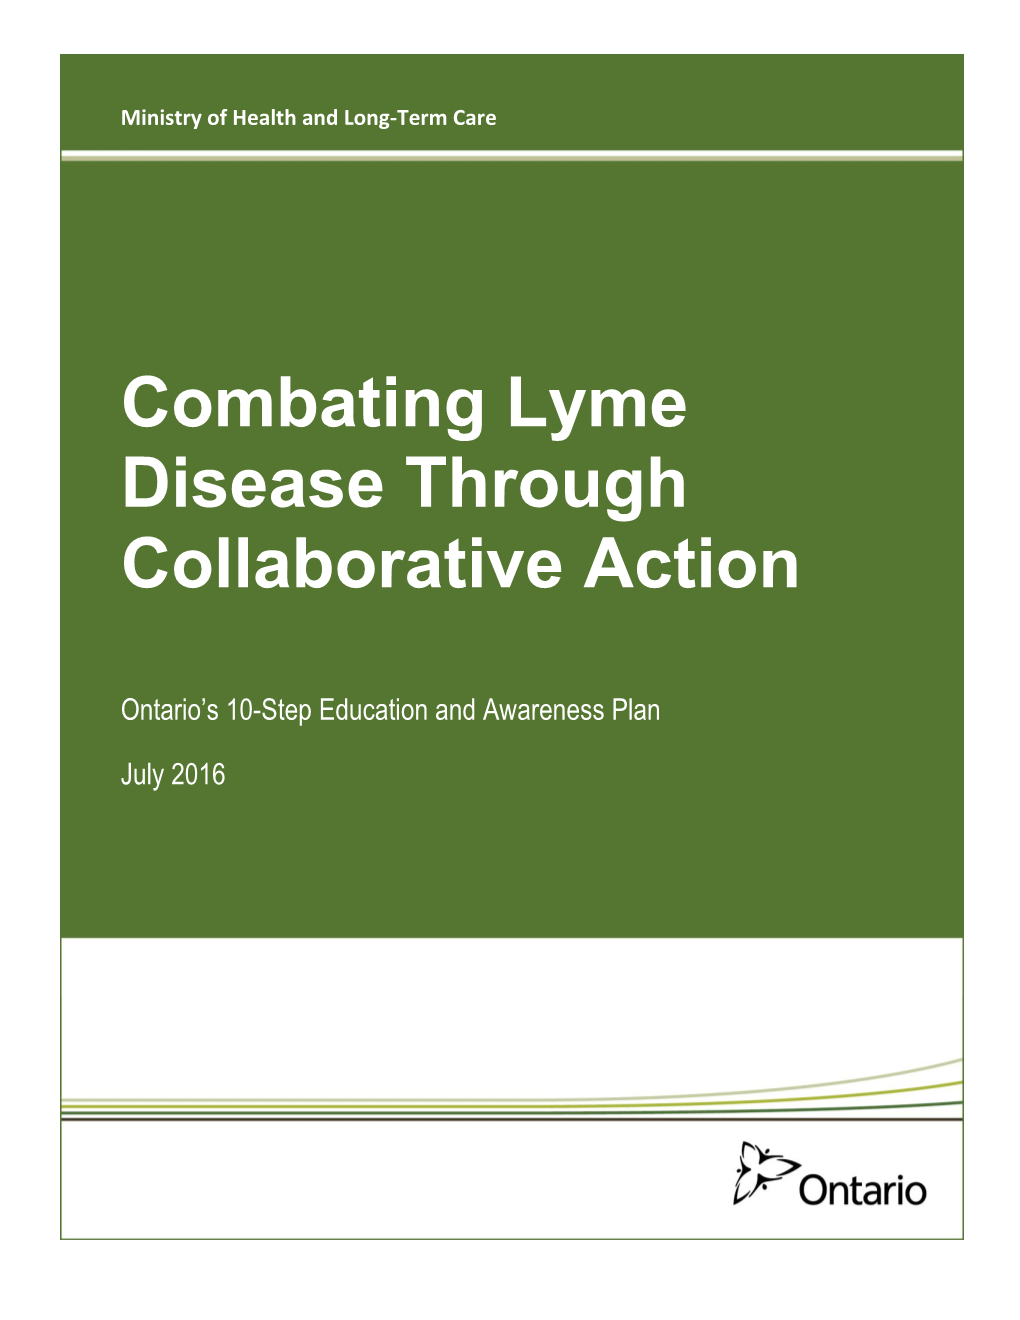 Combating Lyme Disease Through Collaborative Action